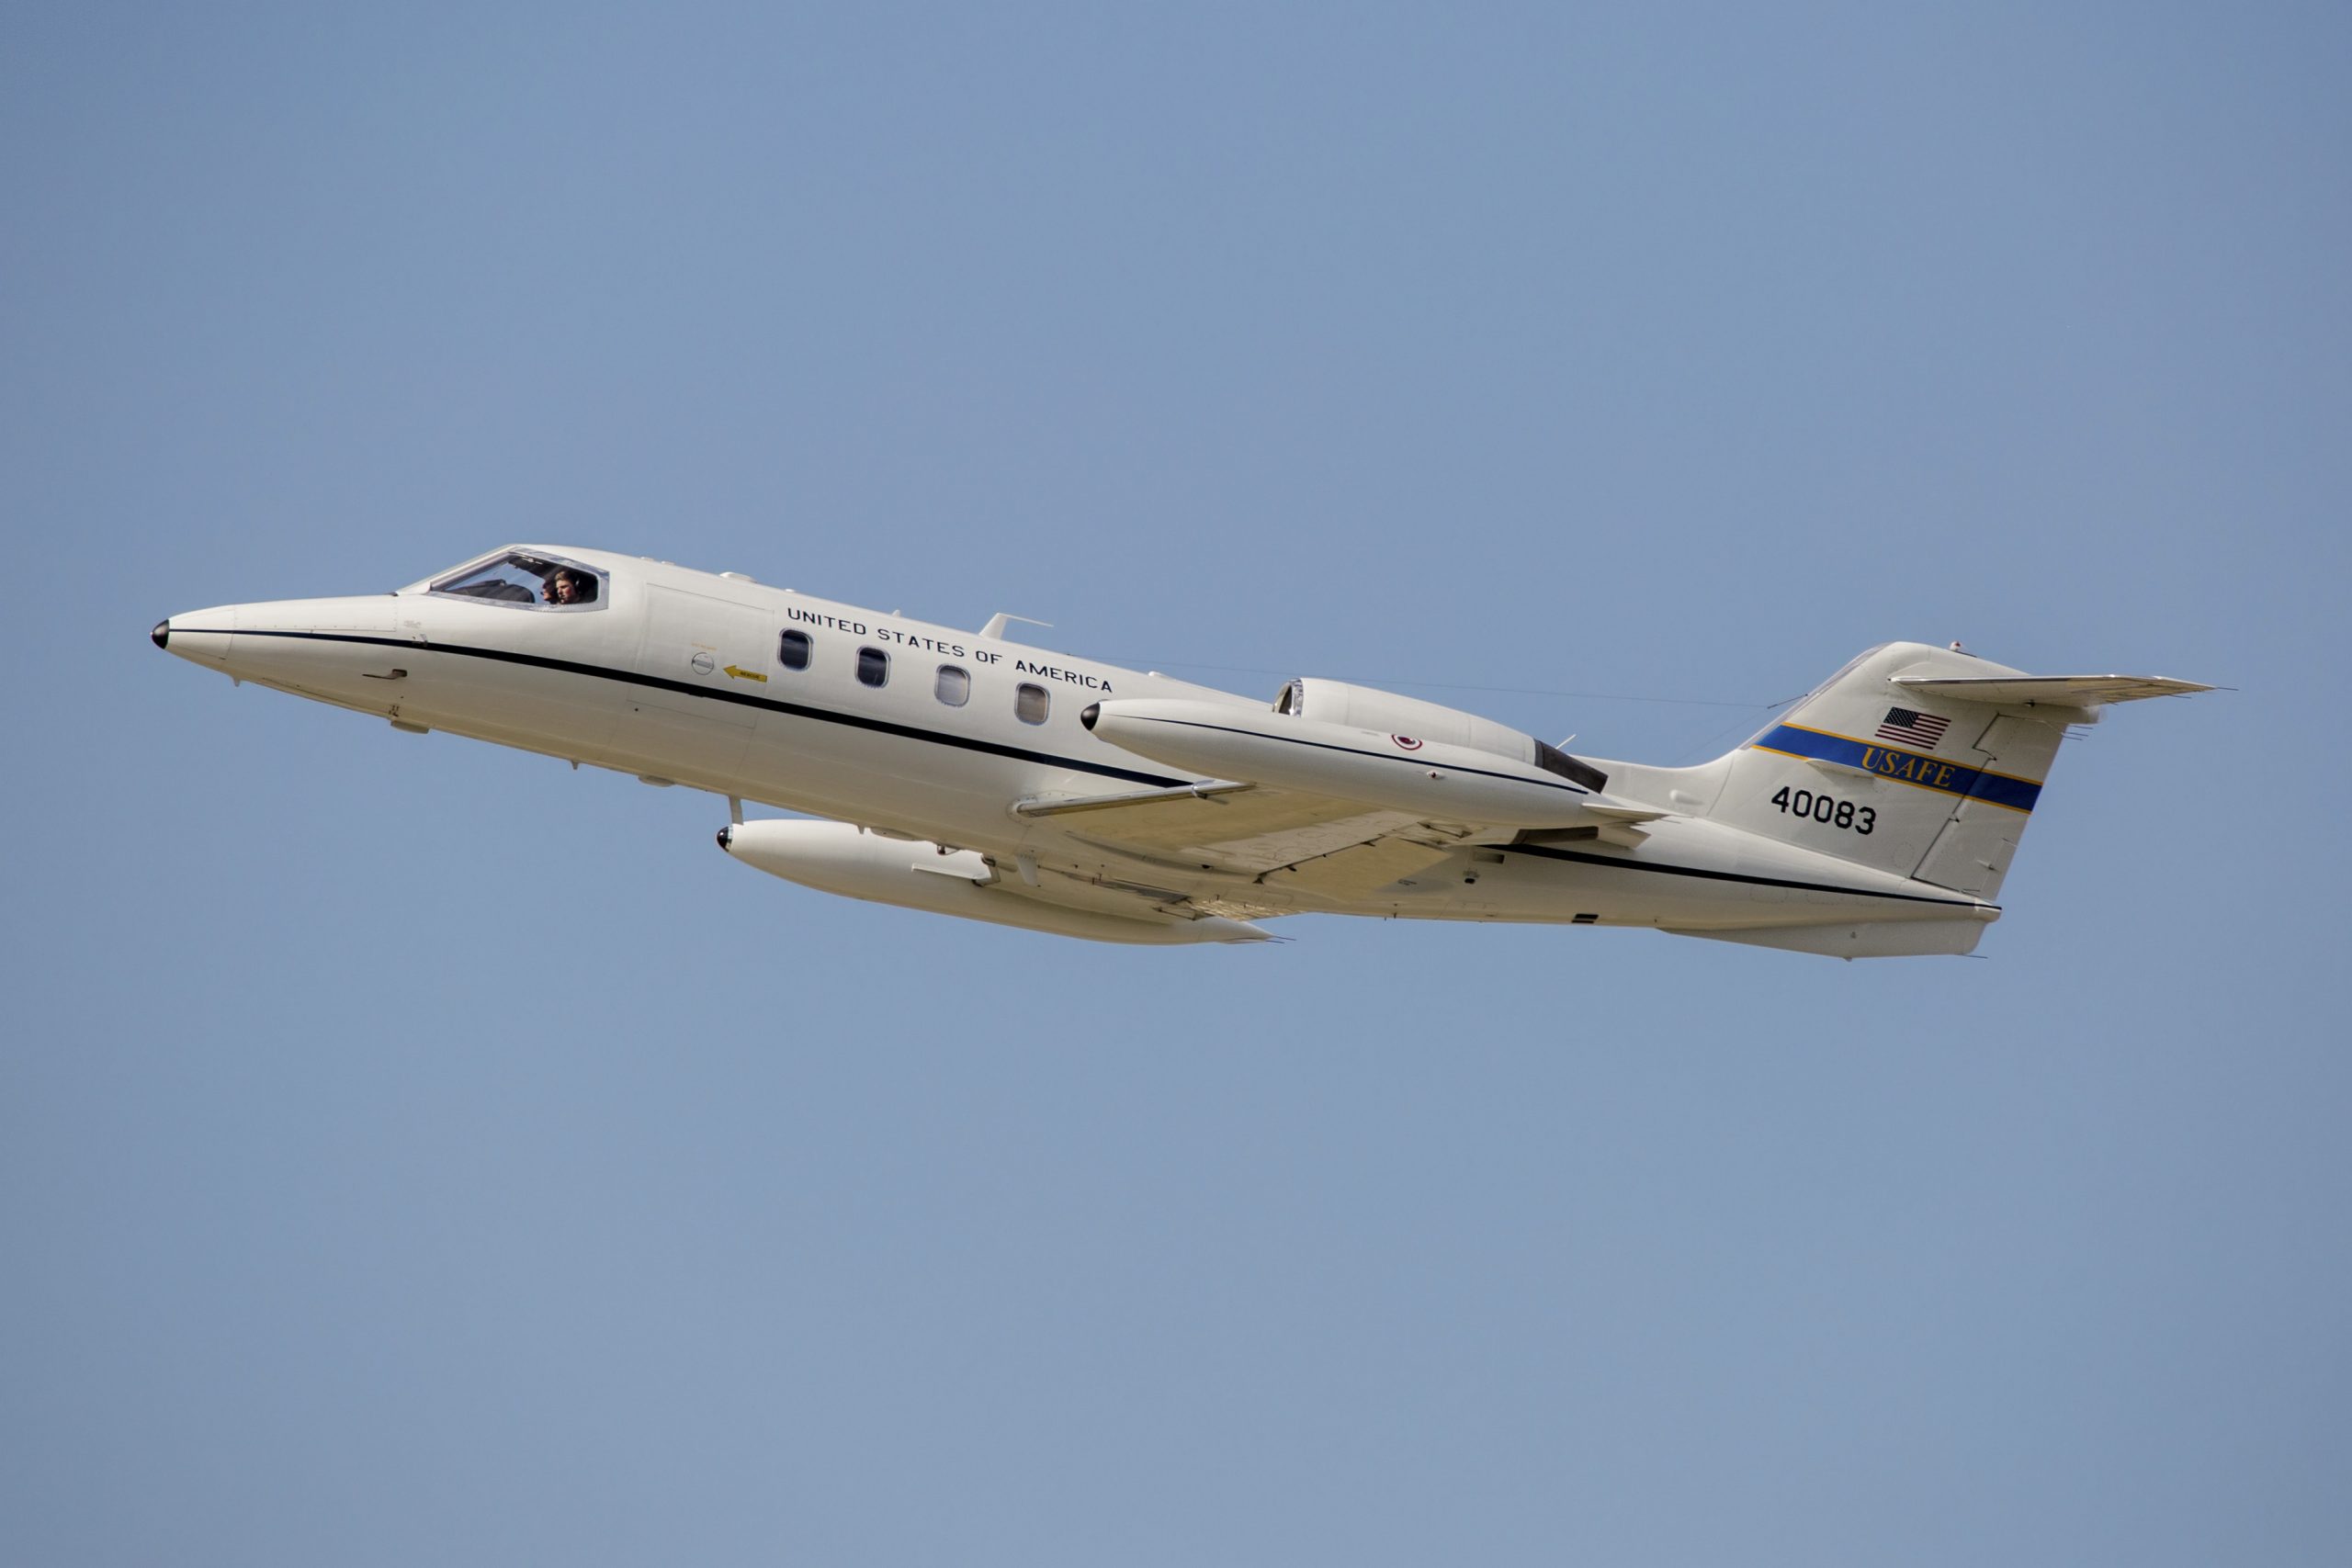 U.S. Air Forces in Europe C-21 Learjet flying